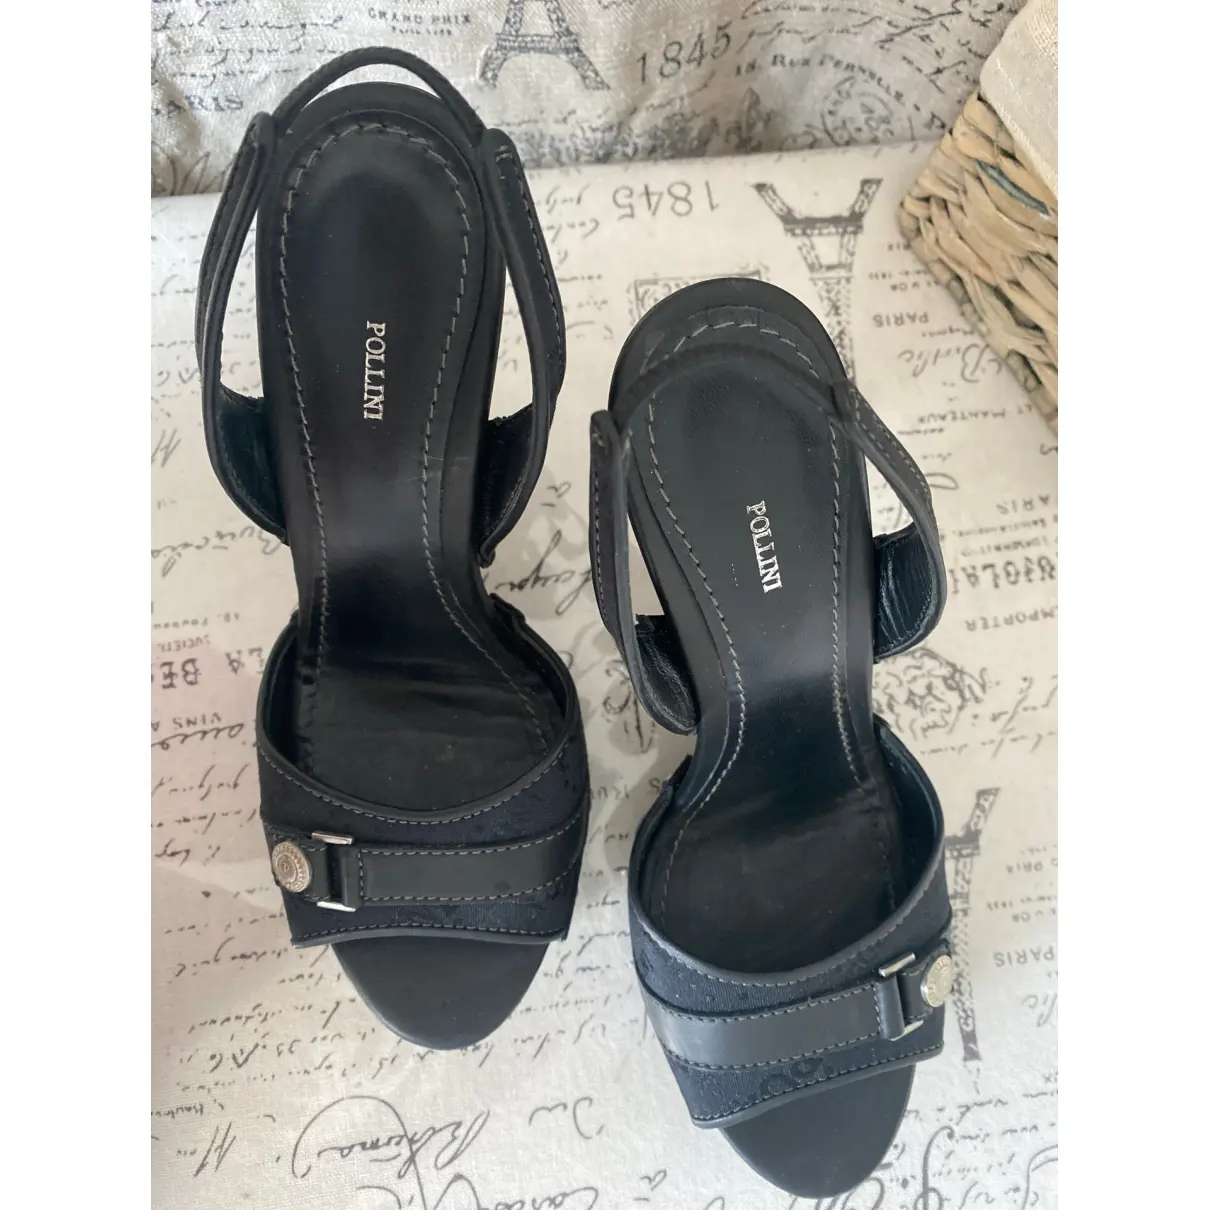 Buy Pollini Leather sandals online